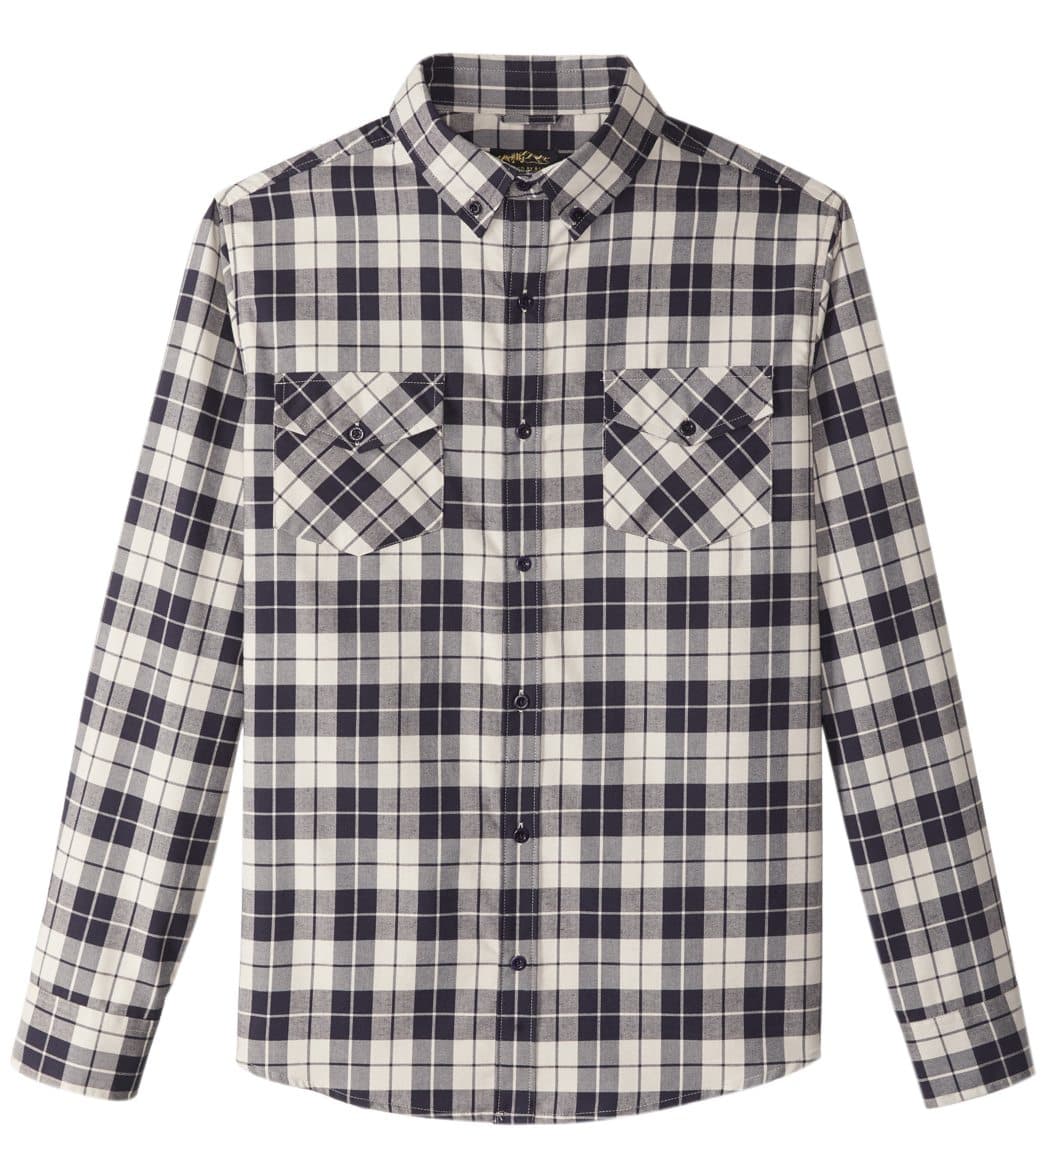 United By Blue Men's Pickman Stretch Long Sleeve Plaid Shirt - Cream/Navy Small Cotton/Polyester - Swimoutlet.com